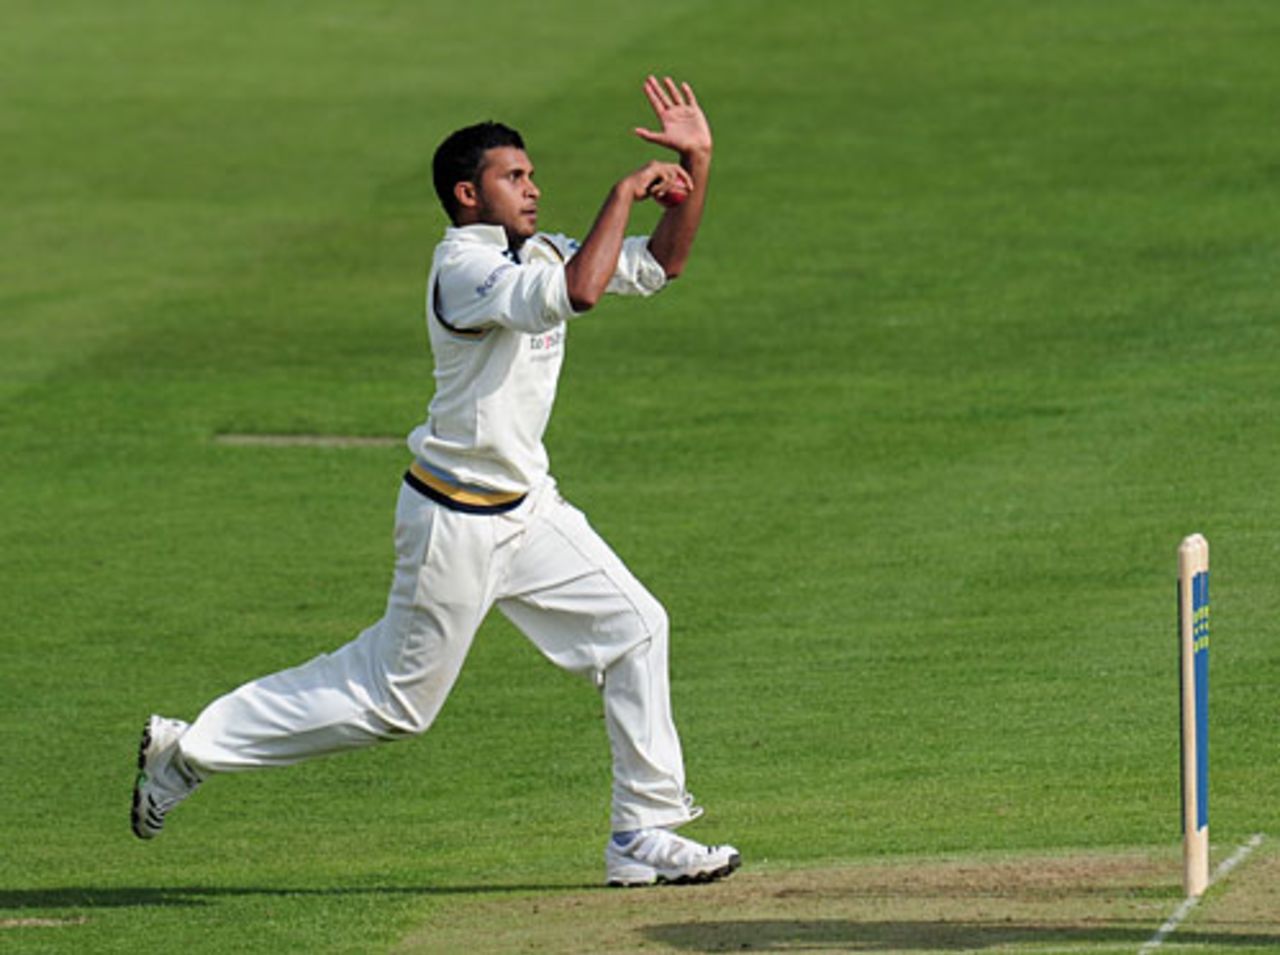 Adil Rashid took one wicket as Warwickshire were bowled out for 217, Warwickshire v Yorkshire, County Championship Division One, Edgbaston, April 9, 2010